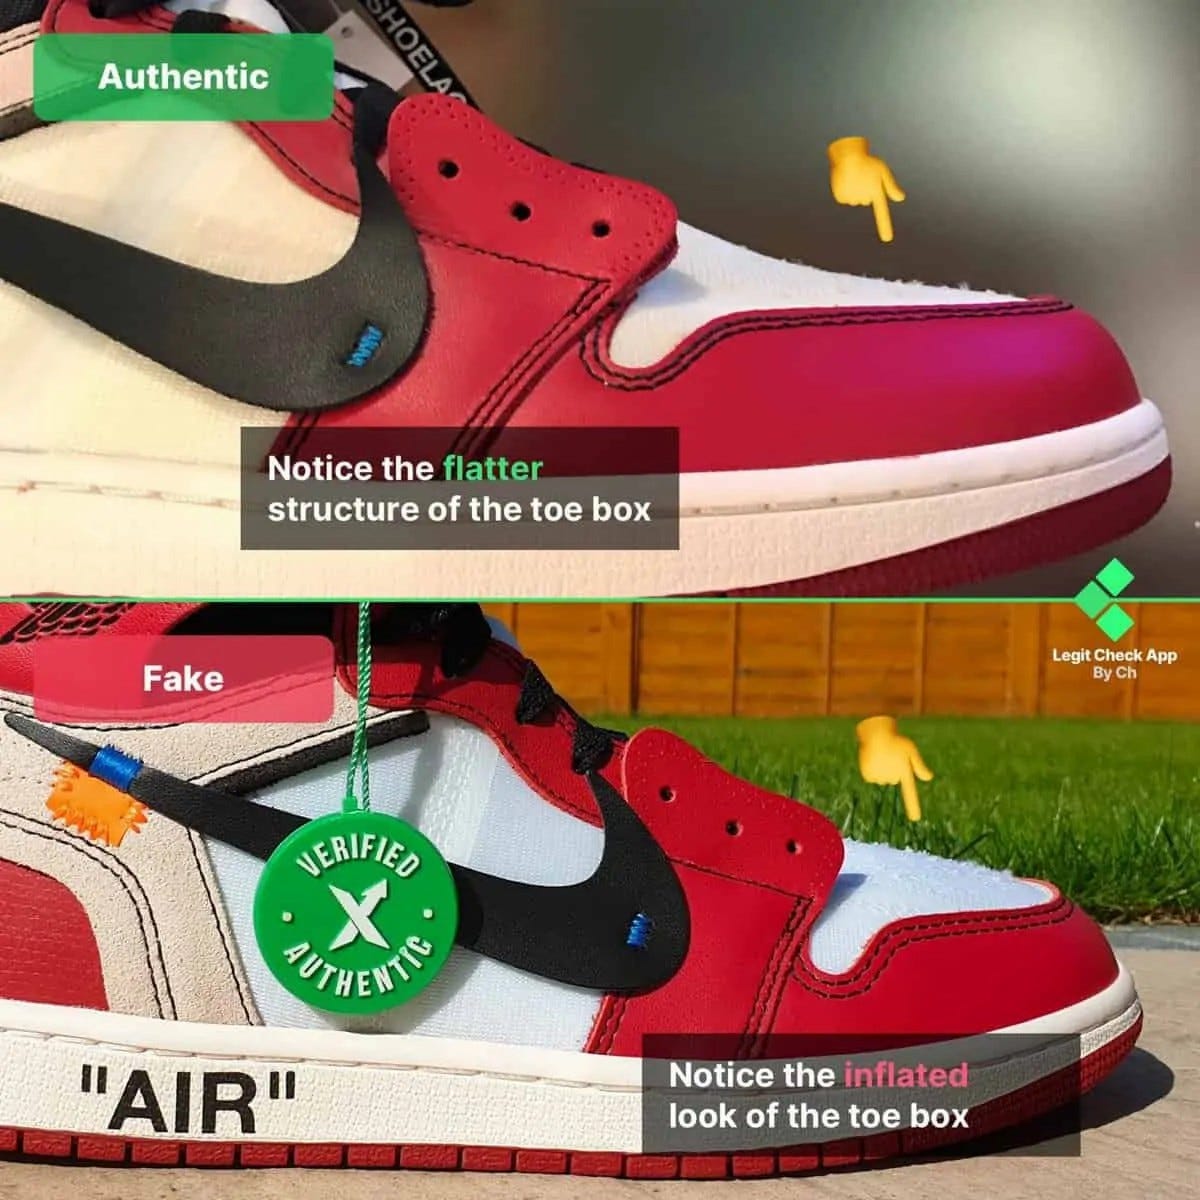 How To Spot Fake Off-White Air Jordan 1 Chicago — Real Vs Fake OW AJ1 OG |  by Legit Check By Ch | Medium